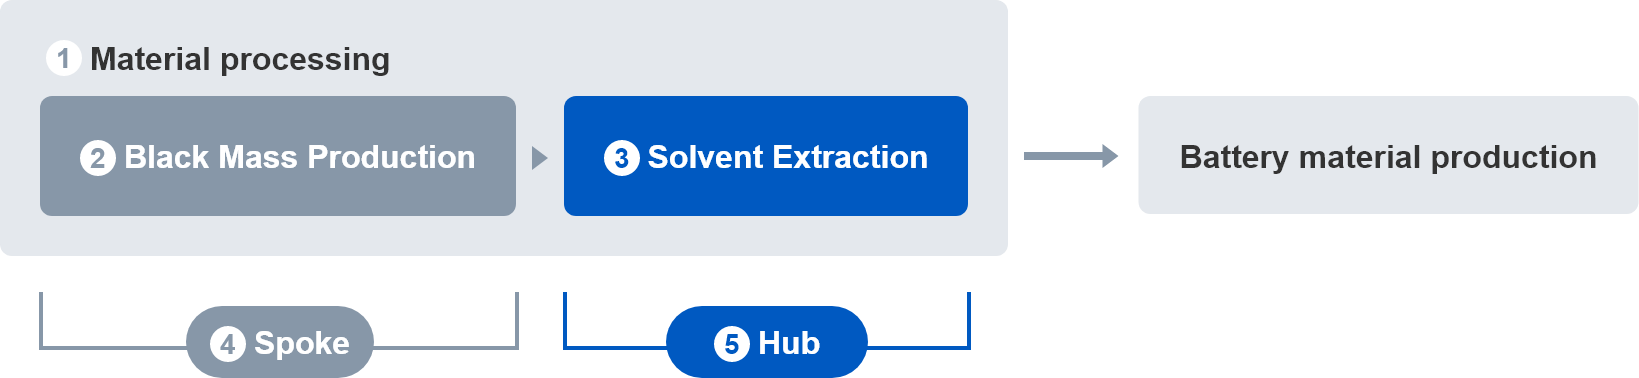 Material Processing: Solvent Extraction Process